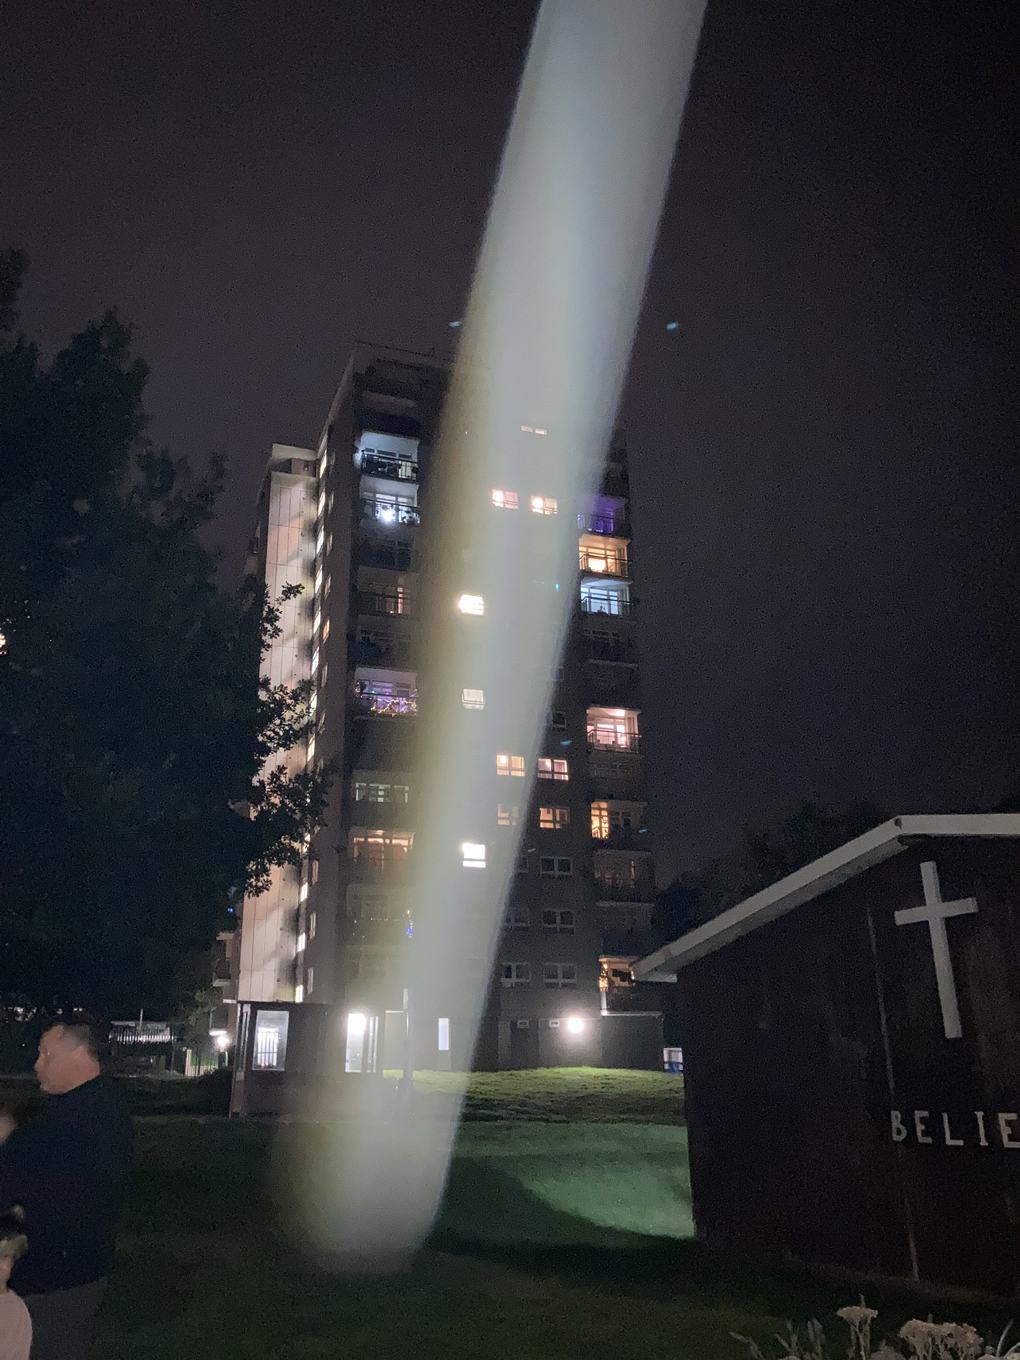 We see a shaft of light over a block on a housing estate